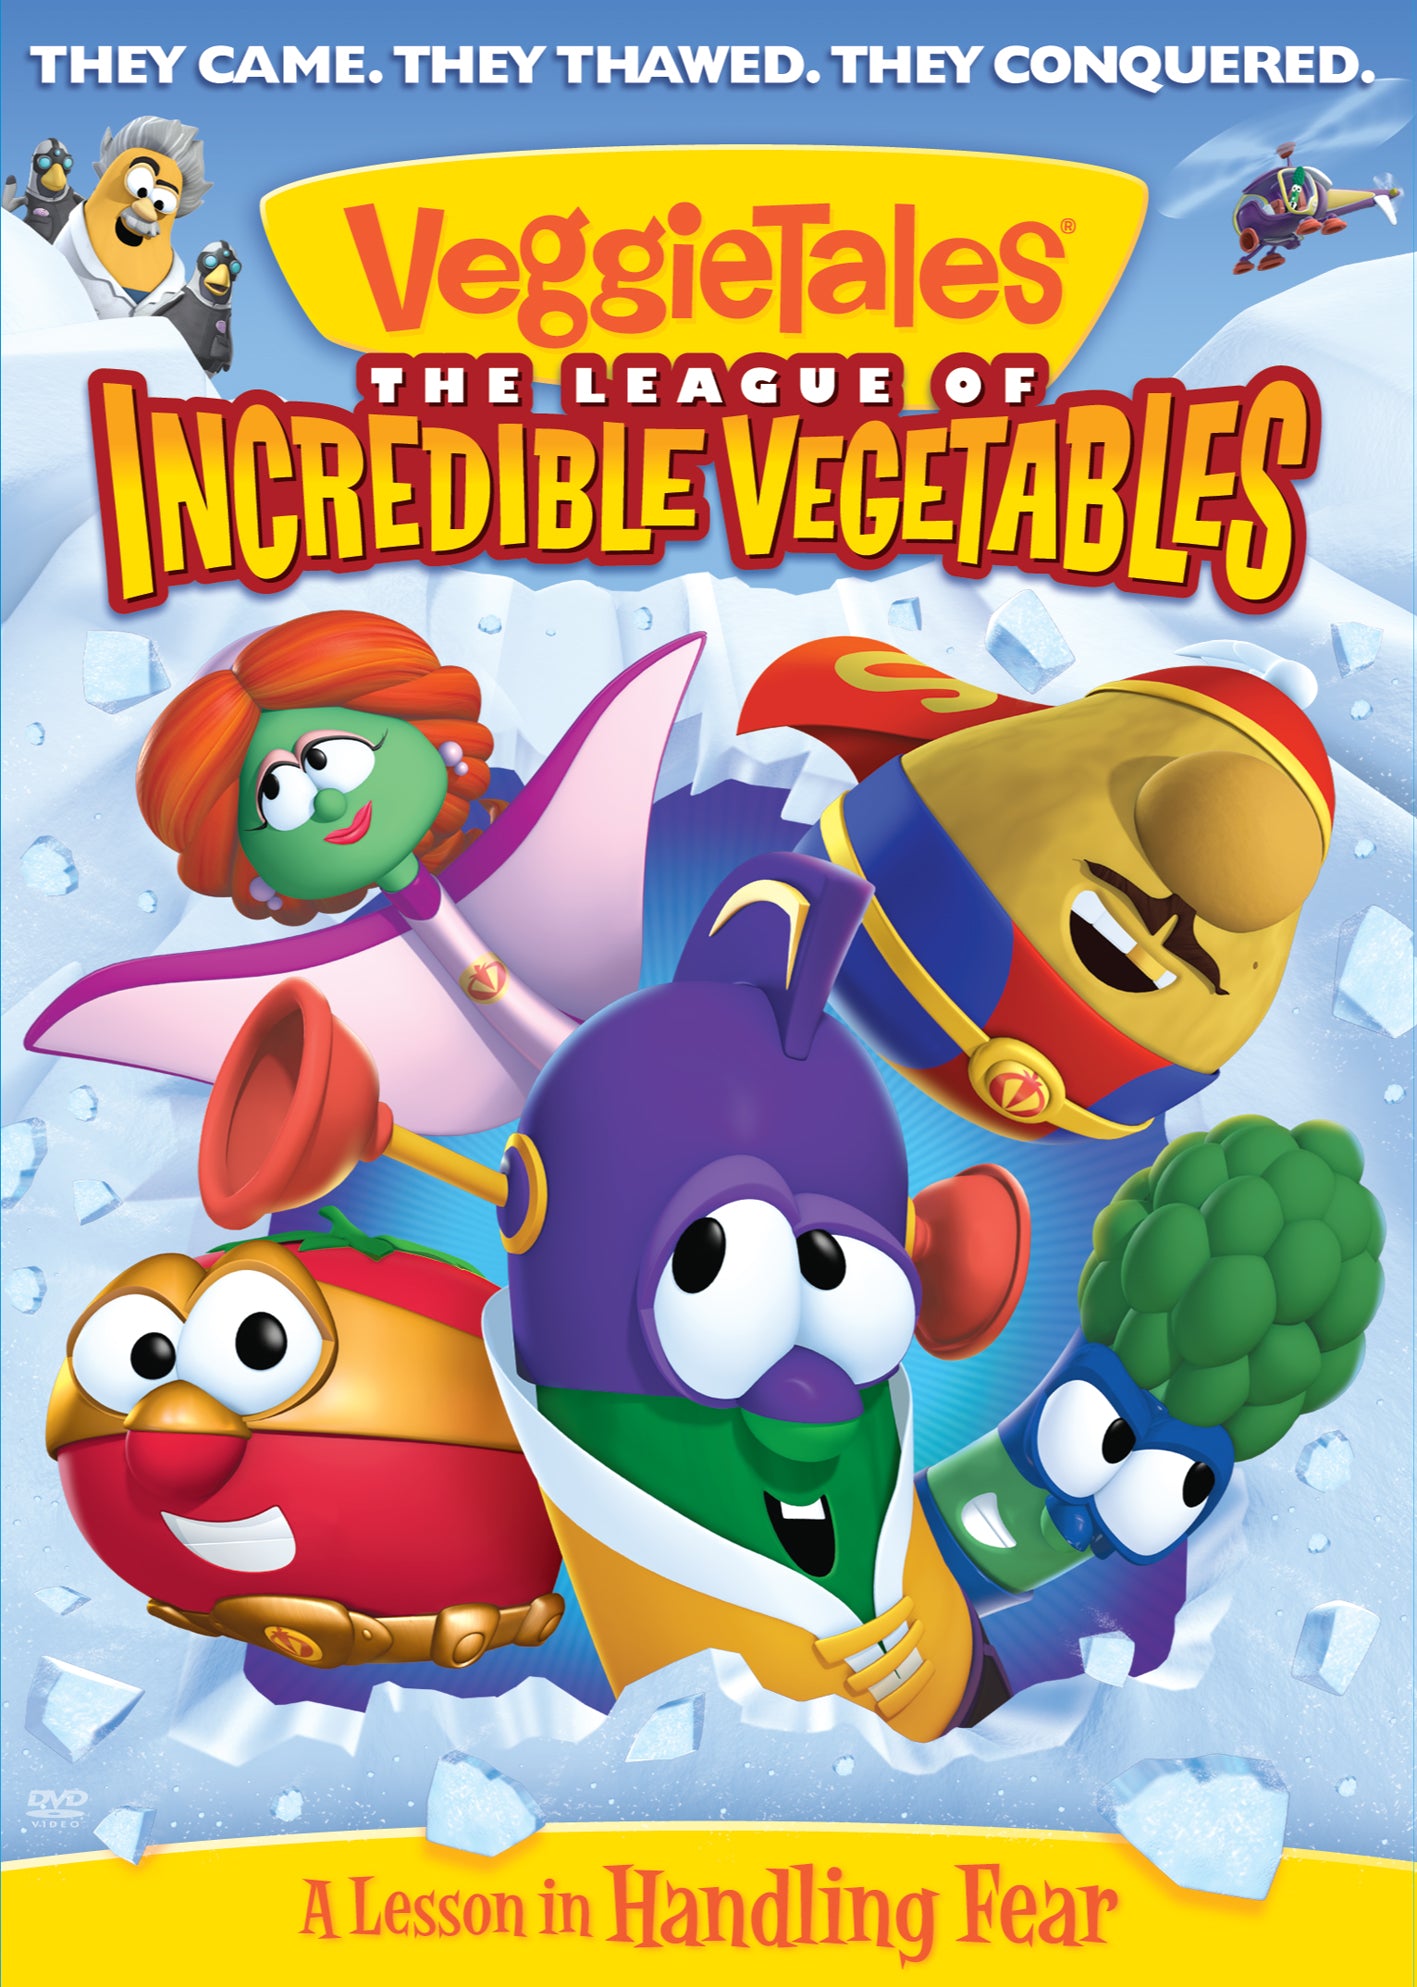 Image of The League of Incredible Vegetables DVD other